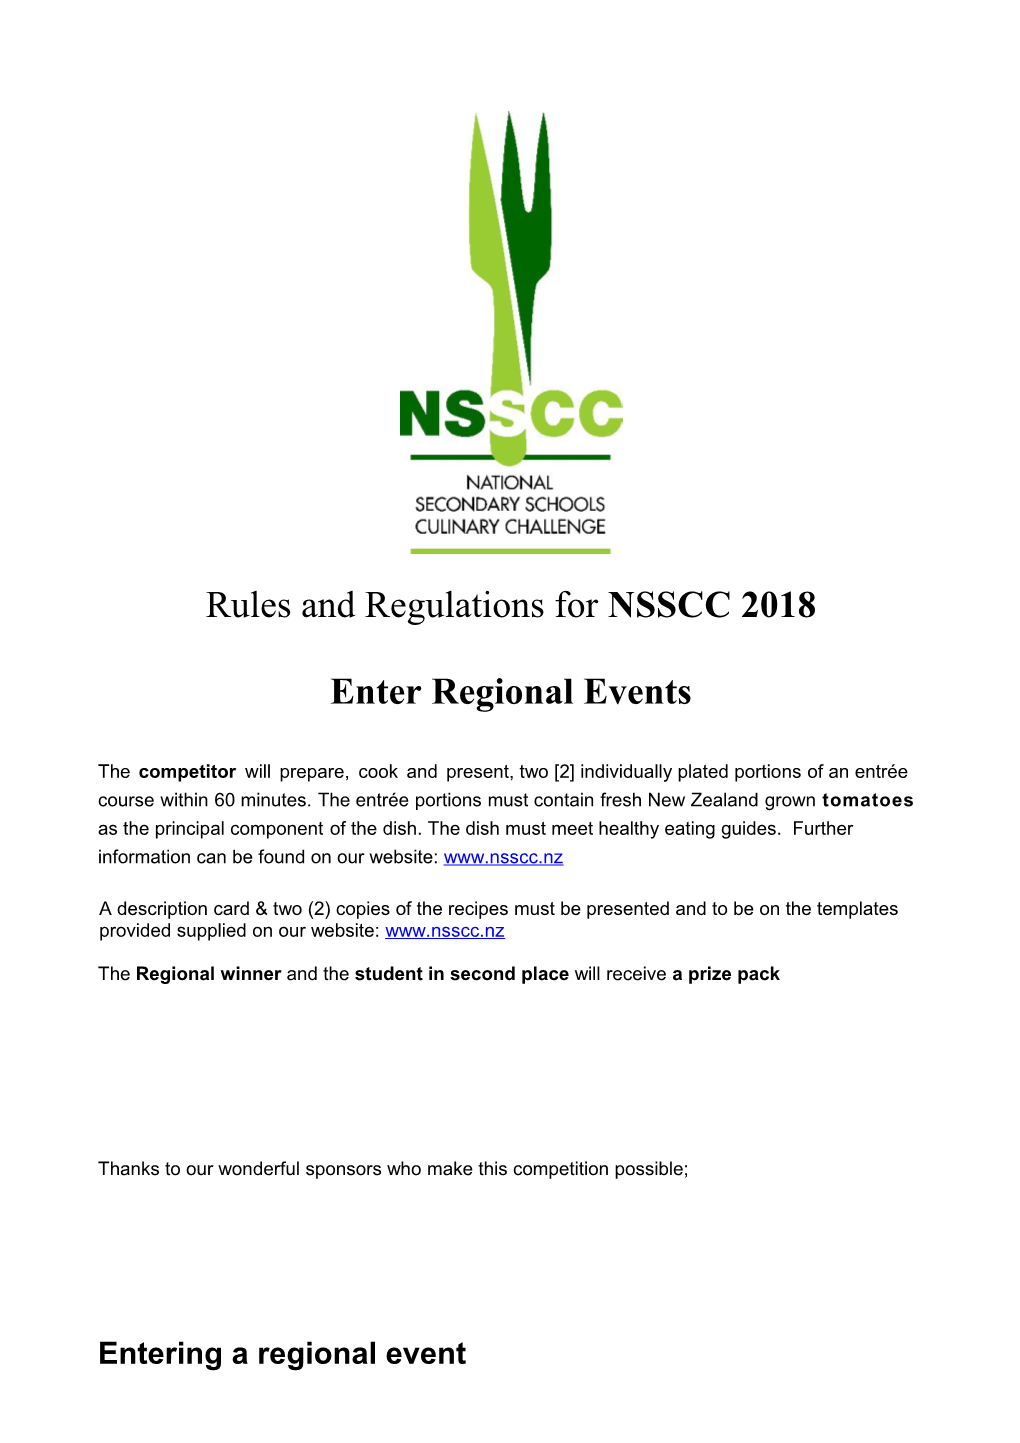 Rules and Regulations for NSSCC 2018